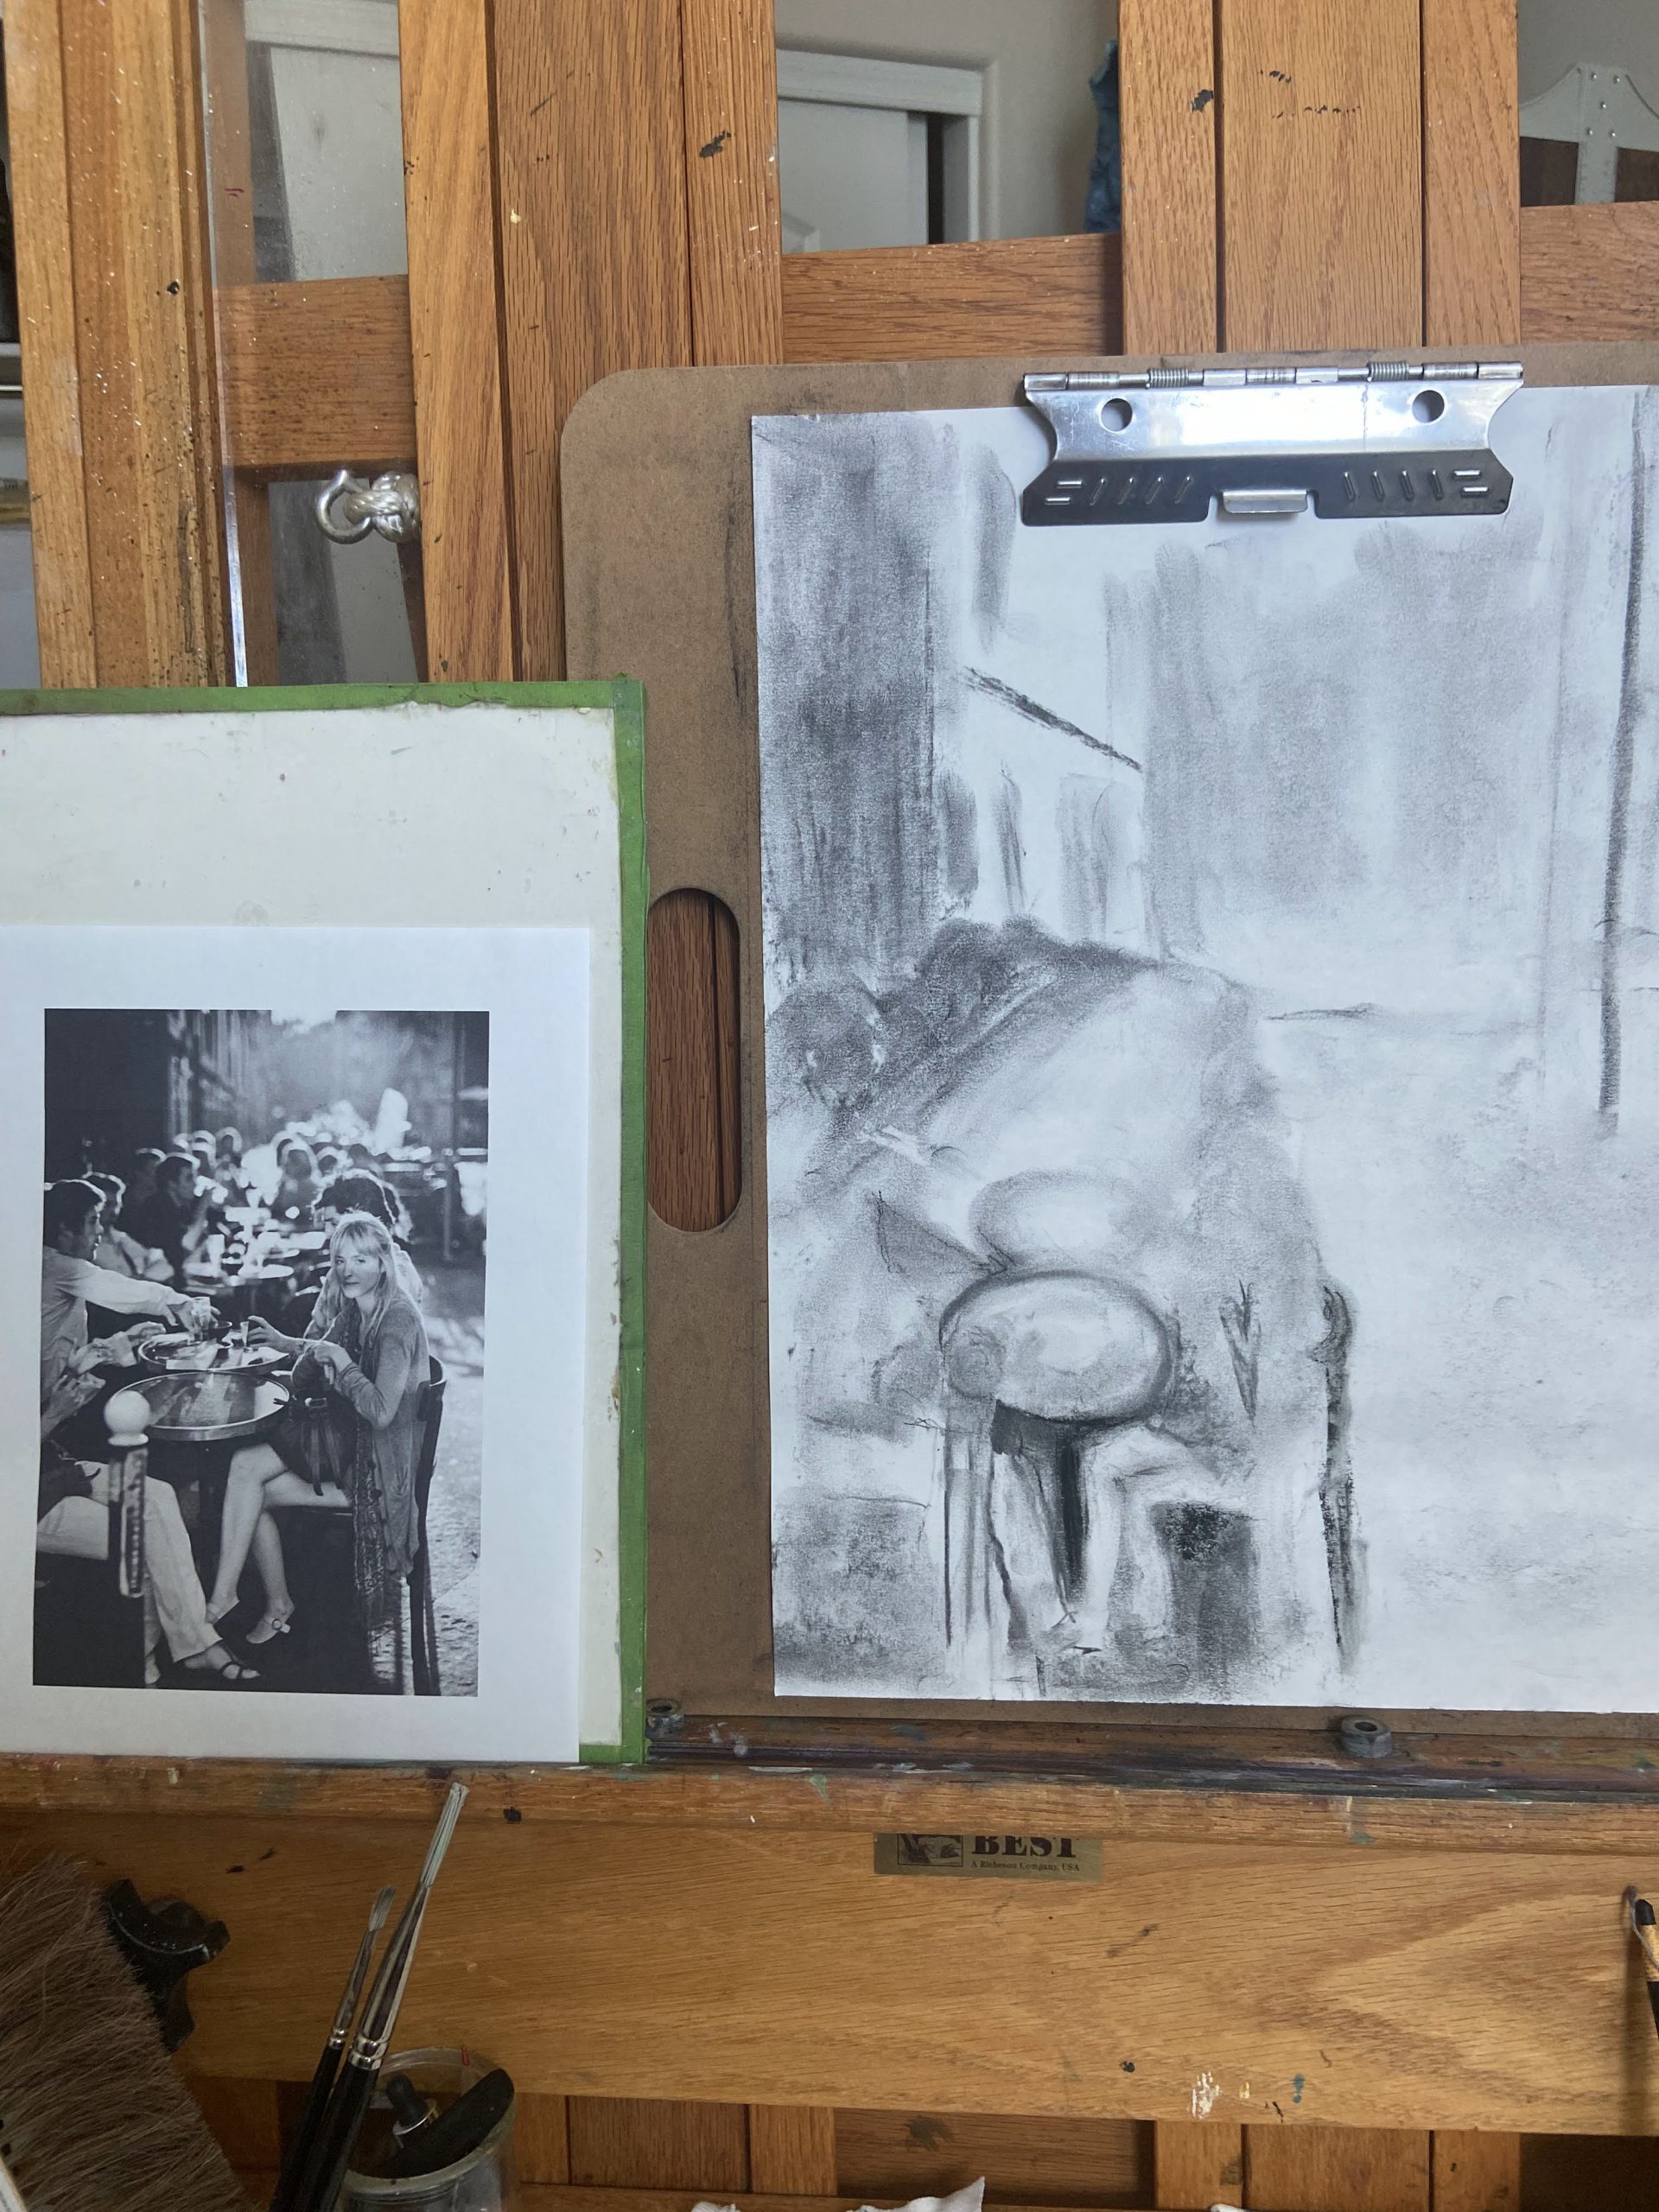 Initial blocking in of a charcoal draawing of a crowd of people